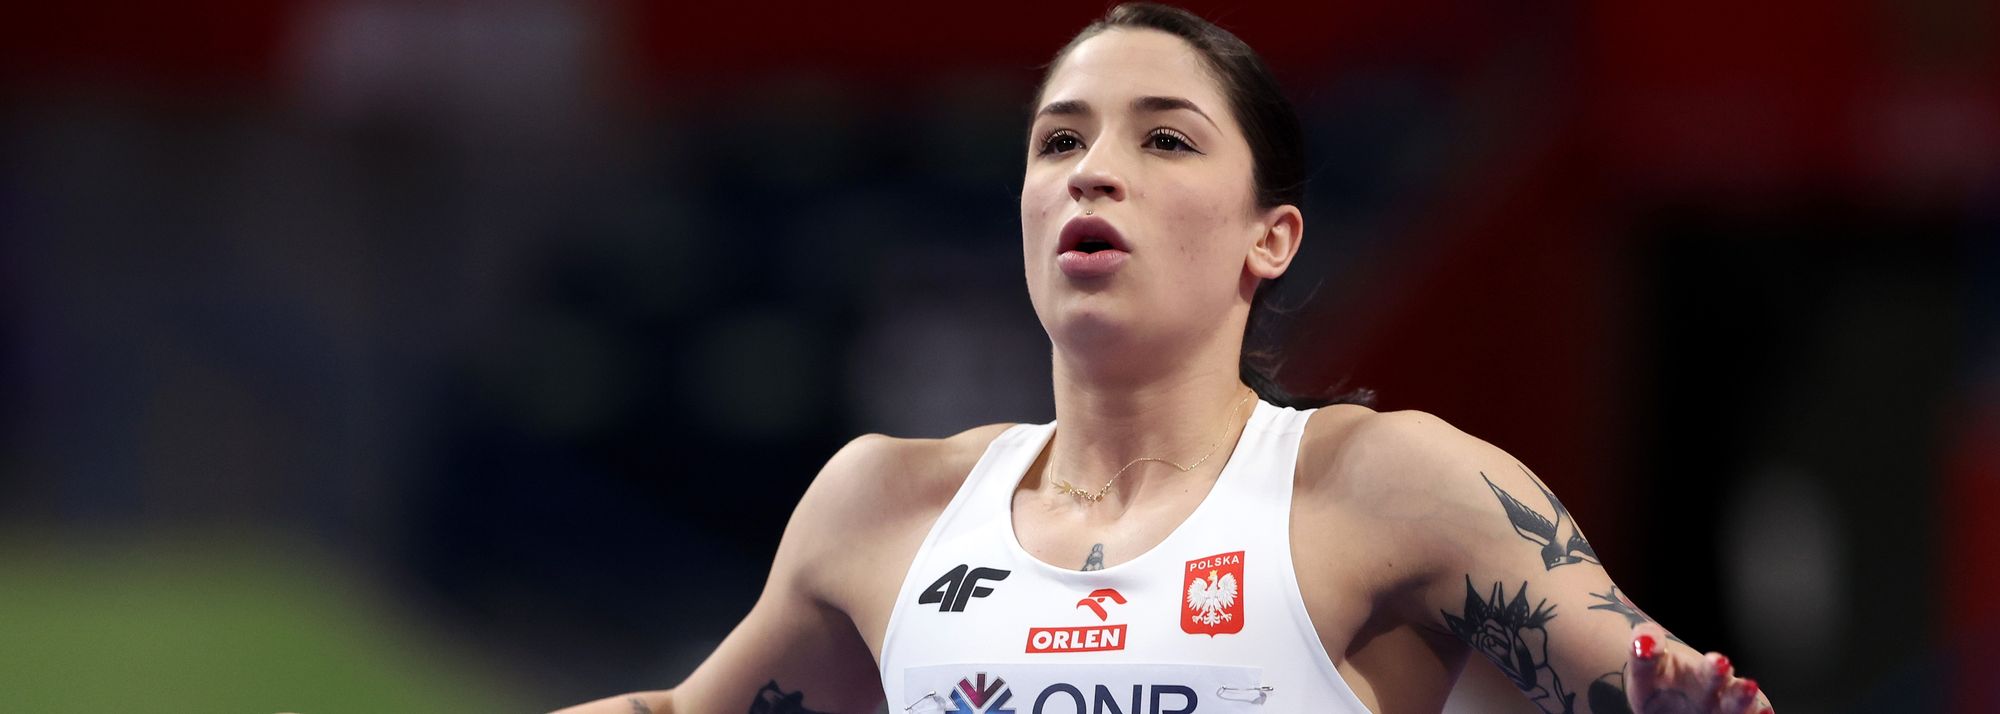 Sprinter Ewa Swoboda is bang on target for her first global senior medal at the World Athletics Indoor Championships Glasgow 24 next month